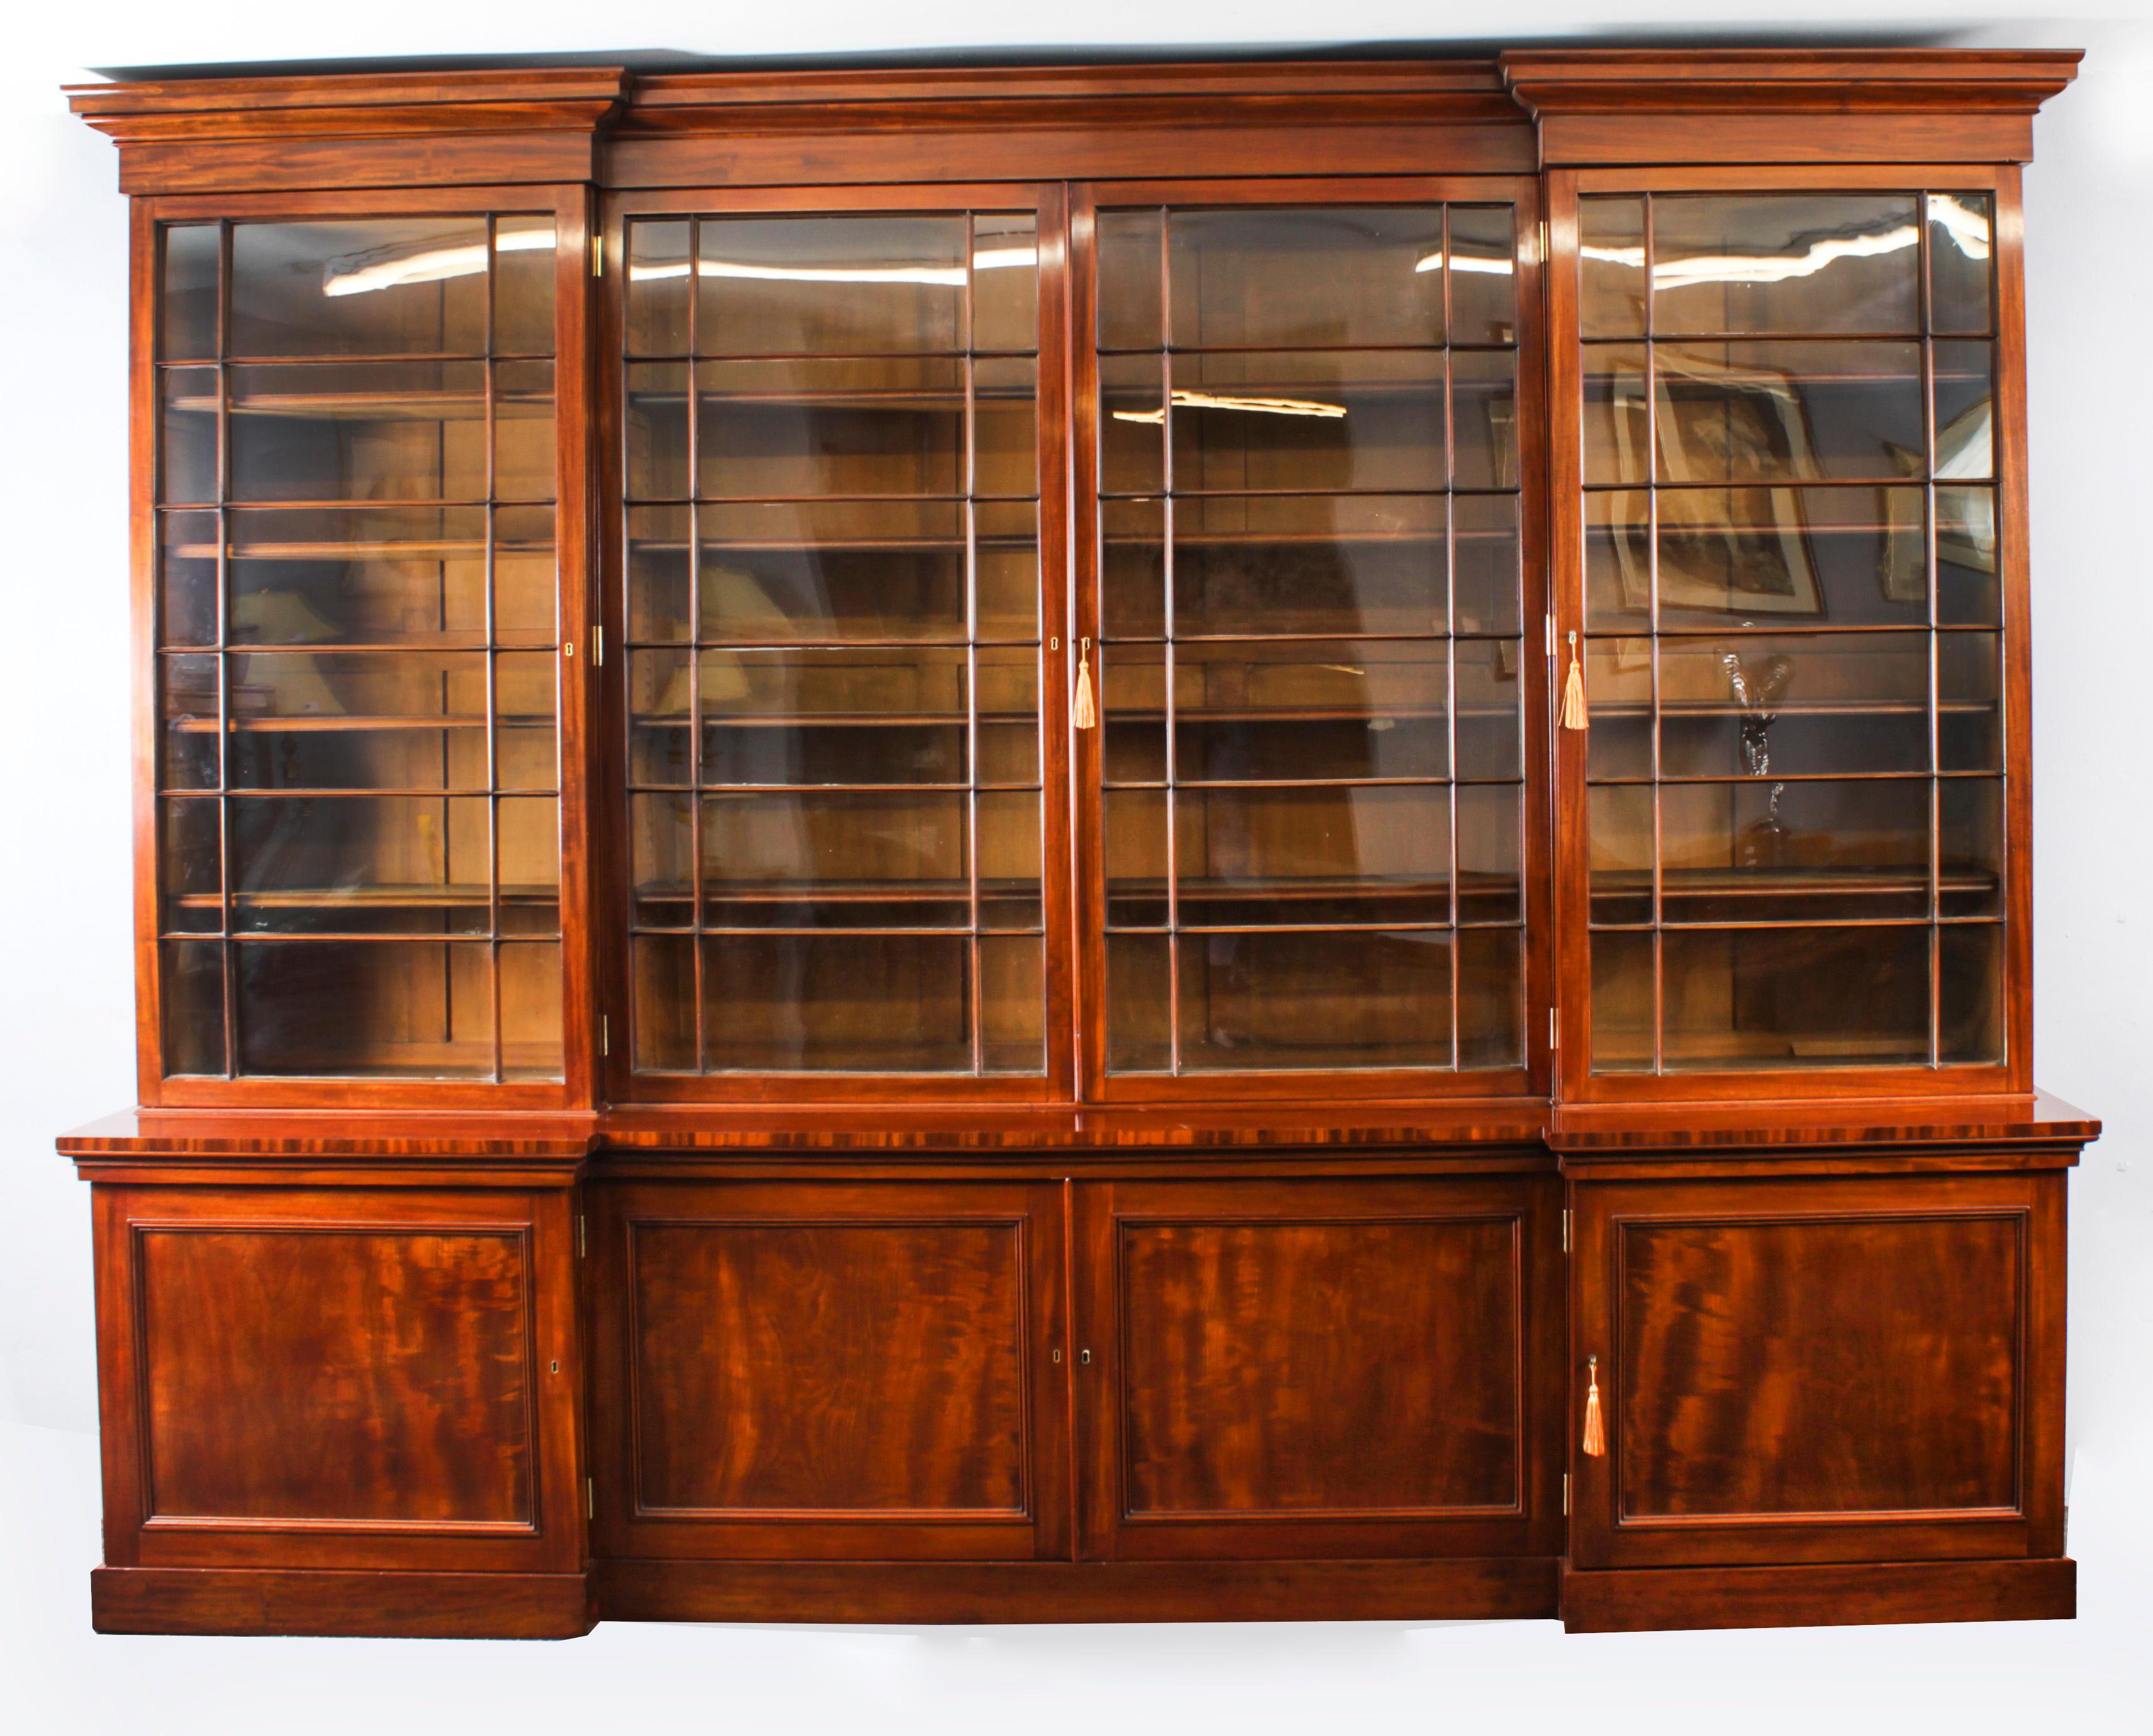 This is a beautiful antique William IV four door inverted breakfront library bookcase, masterfully crafted in rich solid flame mahogany, Circa 1830 in date.

This magnificent bookcase features a moulded cornice above four square astragal glazed